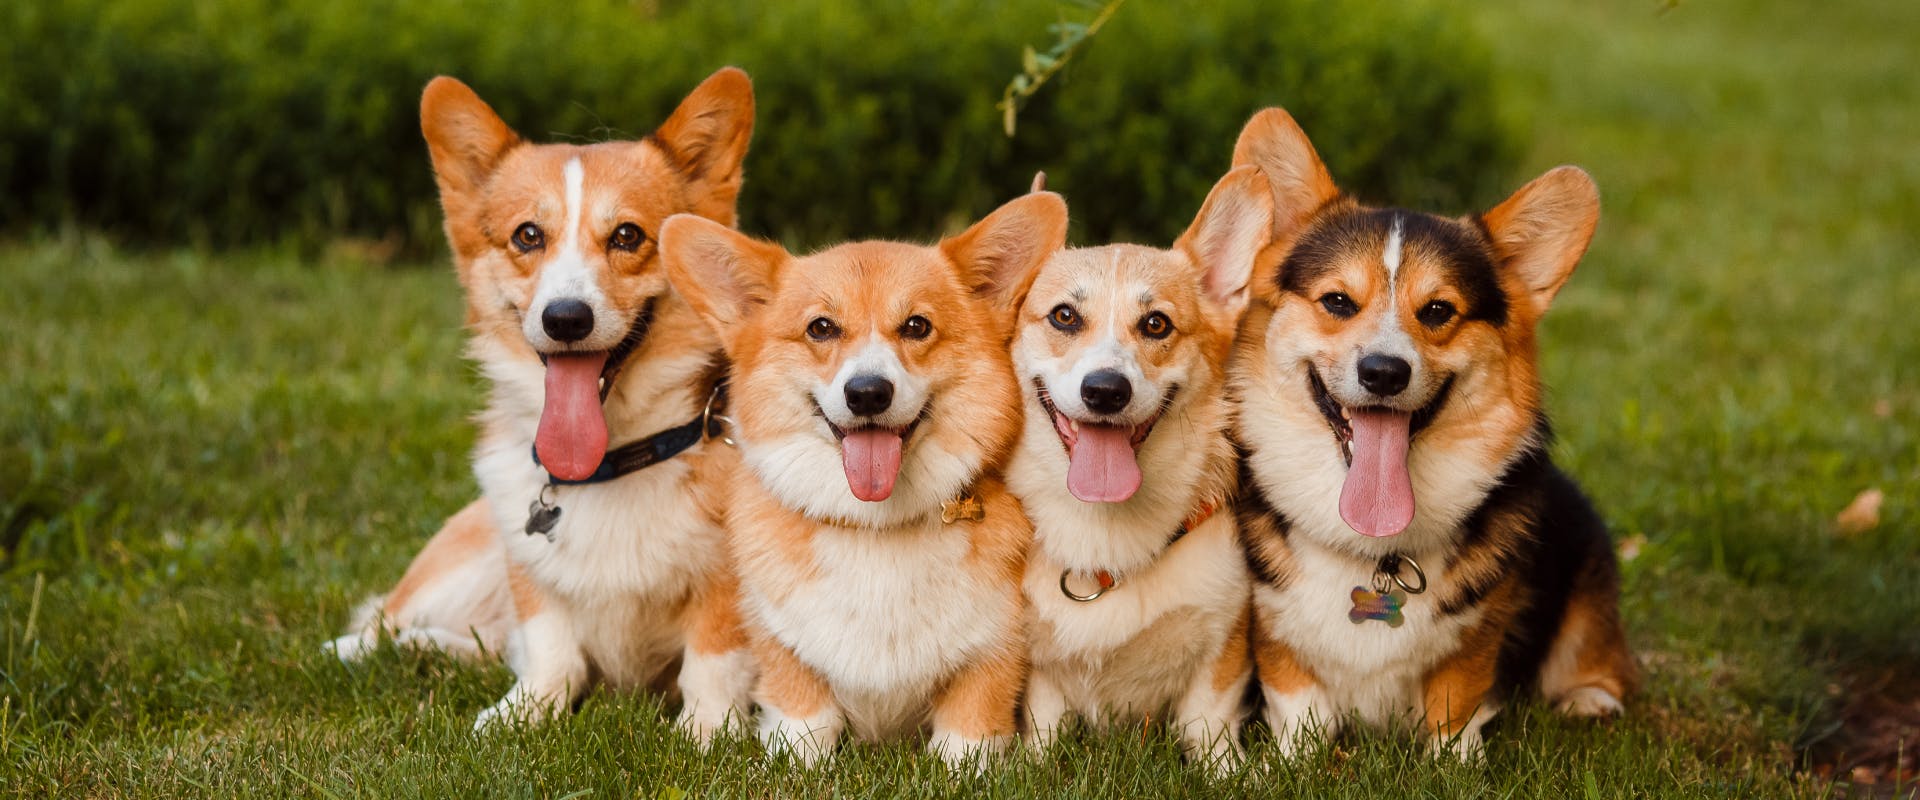 a group of four corgis sat next to each other in a grassy park